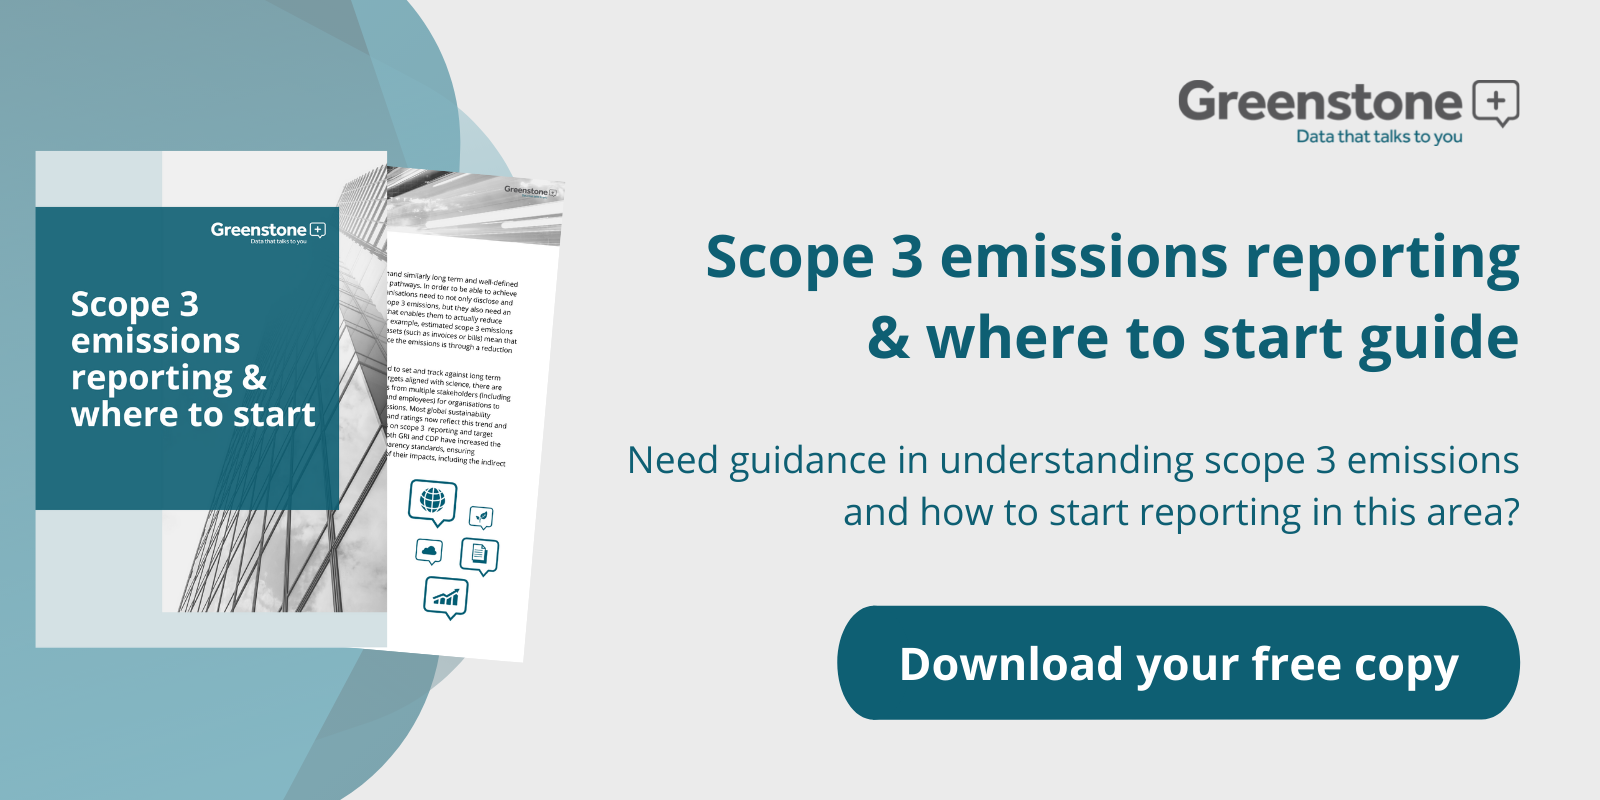 Scope 3 emissions reporting & where to start 